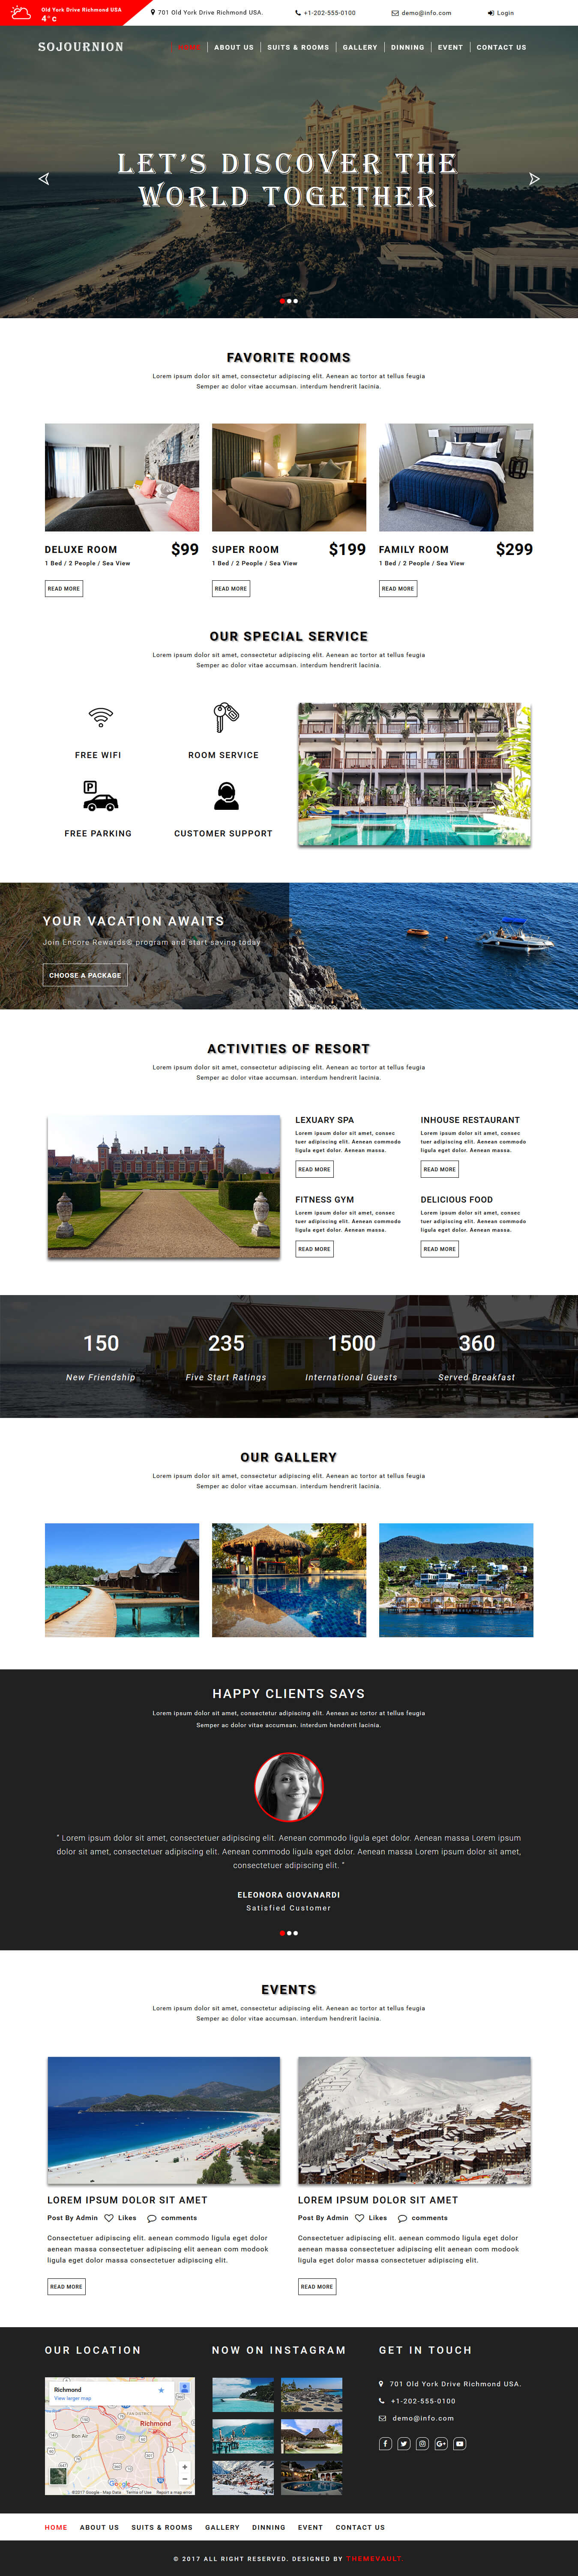 sojournion-free-responsive-hotel-website-template-themevault